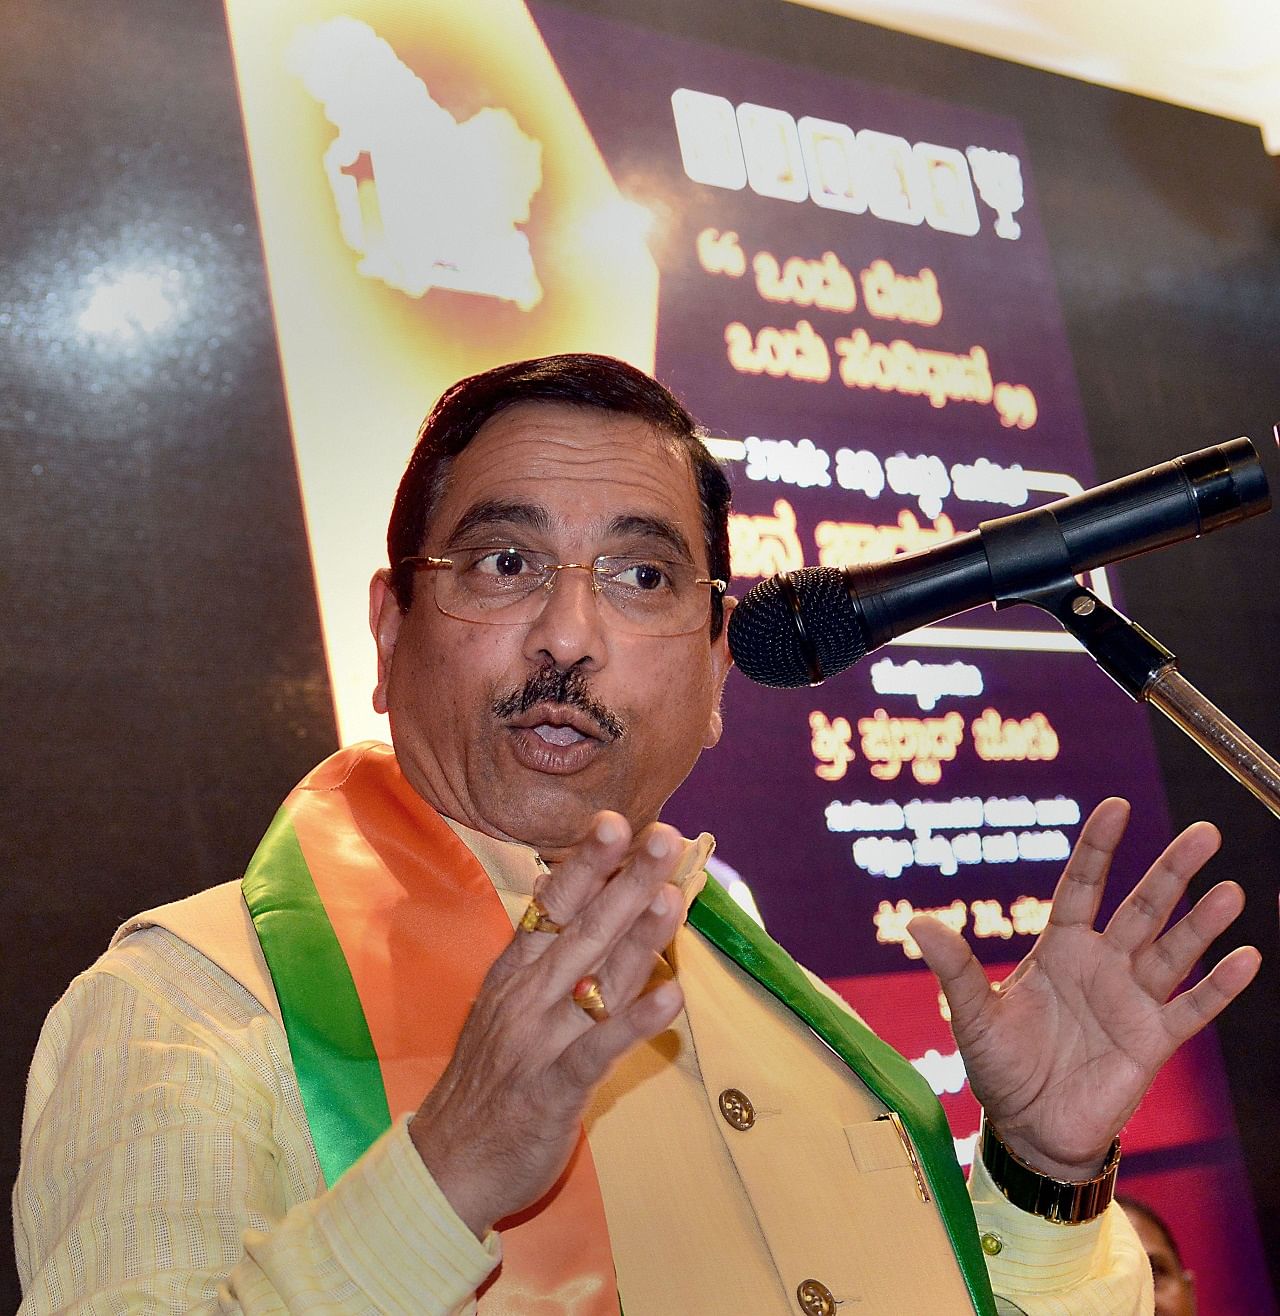 Union Minister for Parliamentary Affairs and Coals and Mines Pralhad Joshi addresses during "Jana Jagaran Sabha" on benefits of abrogating Article 370 in the state of Jammu and Kashmir, in Bengaluru (PTI Photo)